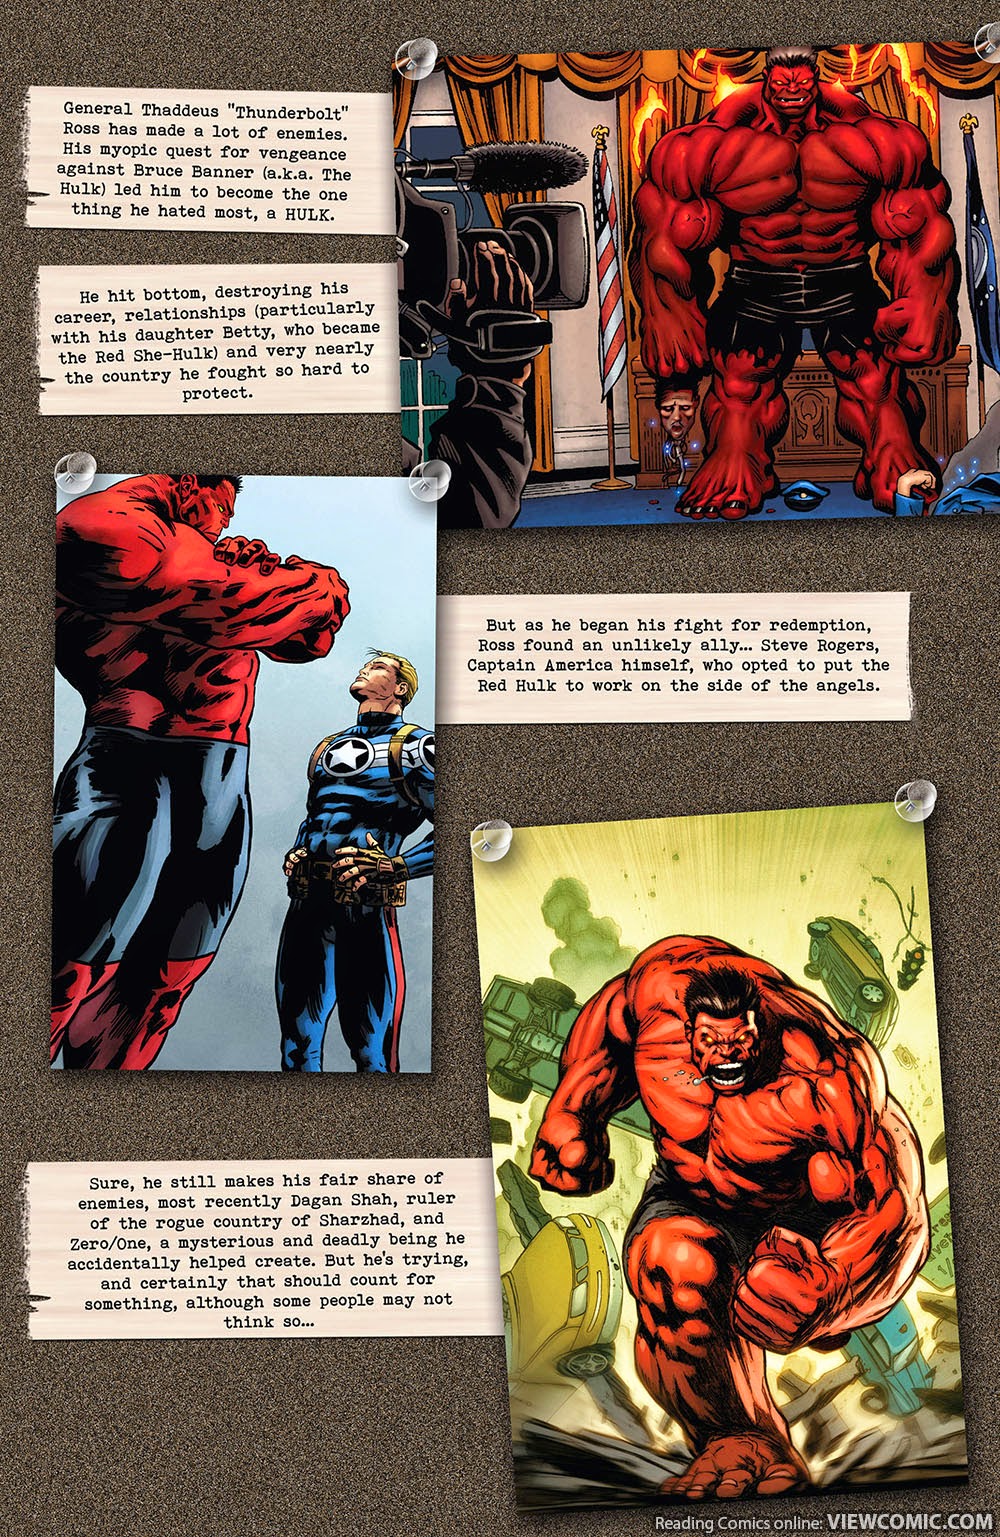 corey mendenhall recommends Red She Hulk Xxx